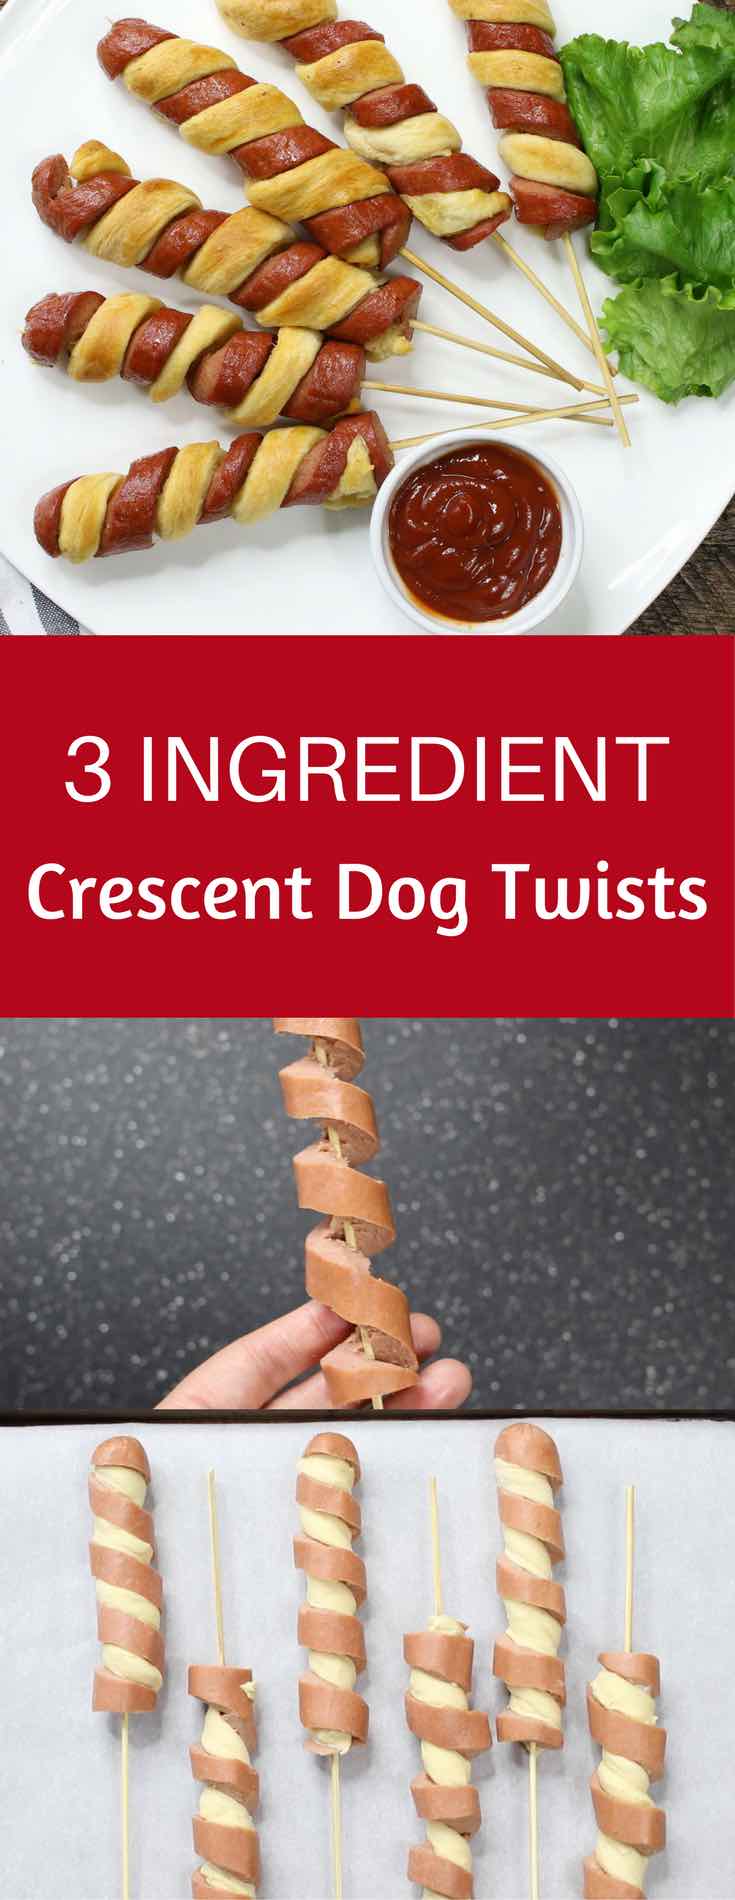 3 Ingredient Crescent Dog Twists – a super easy and kid friendly snack that comes together in minutes and is a guaranteed hit. All you need is 3 simple ingredients: hot dogs, crescent roll dough and egg wash. It’s great for parties and is so yummy! Video recipe. | tipbuzz.com